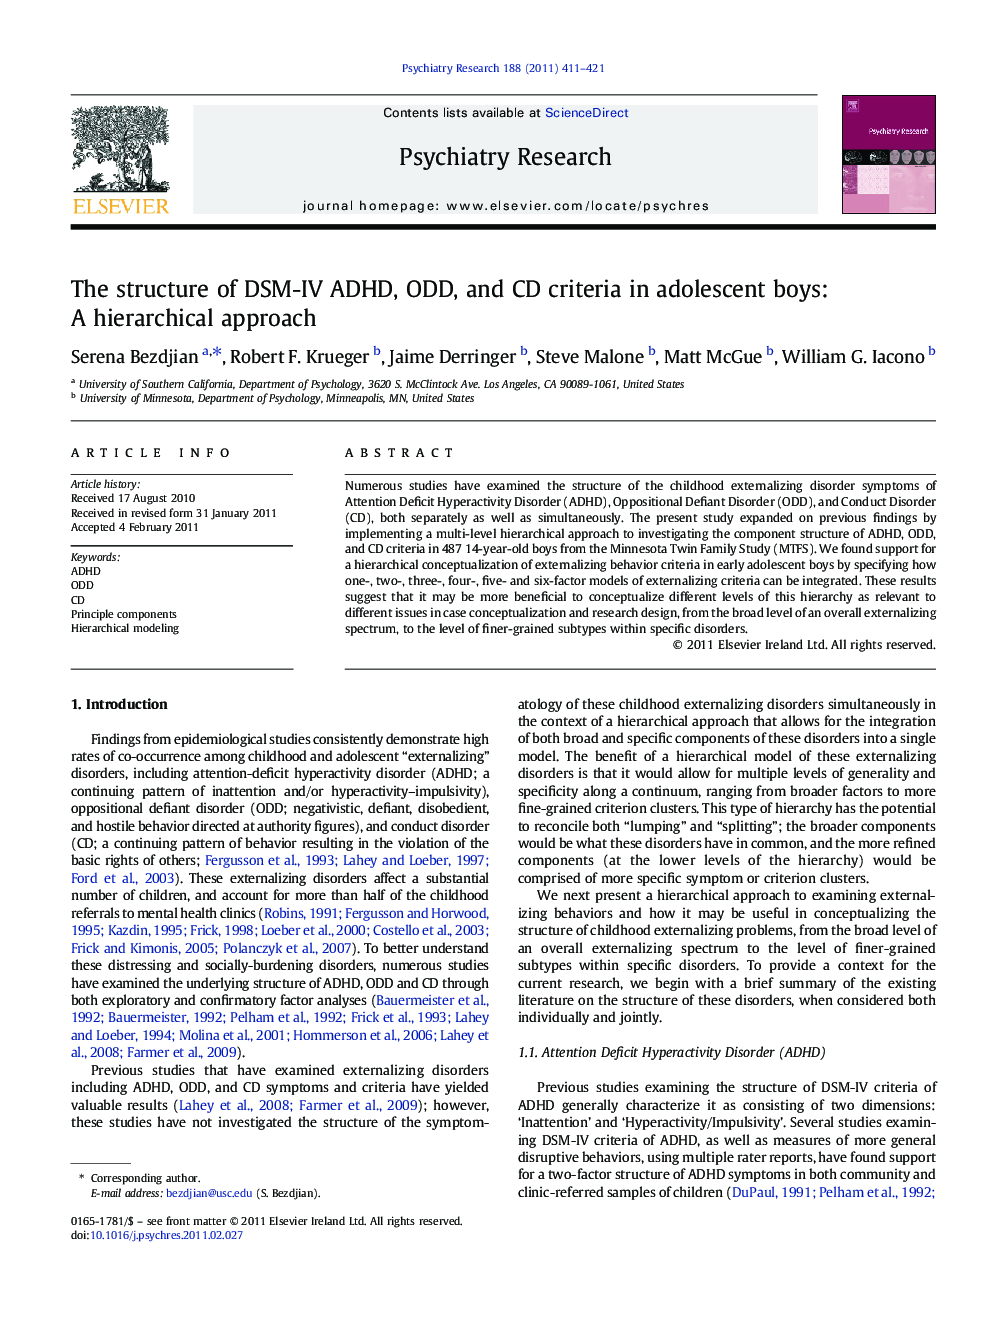 The structure of DSM-IV ADHD, ODD, and CD criteria in adolescent boys: A hierarchical approach